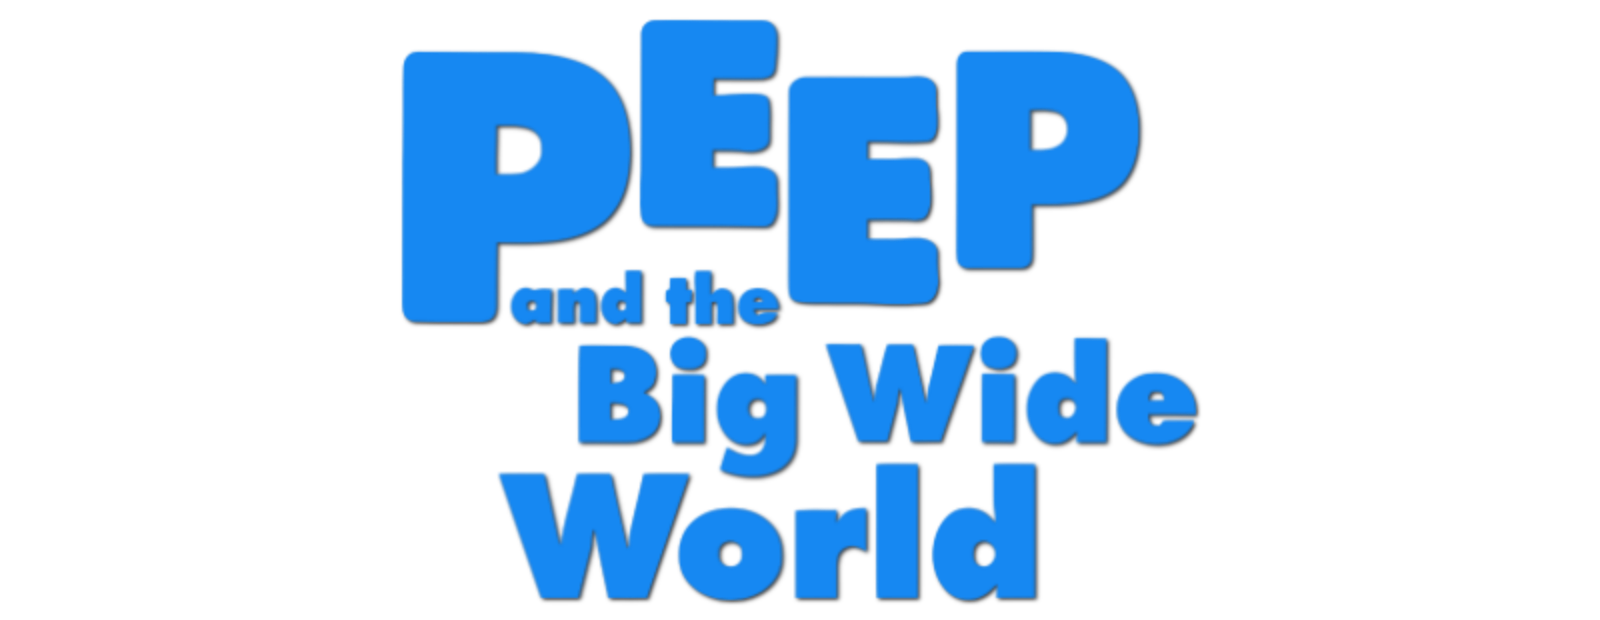 Peep and the Big Wide World 1 (6 DVDs Box Set)